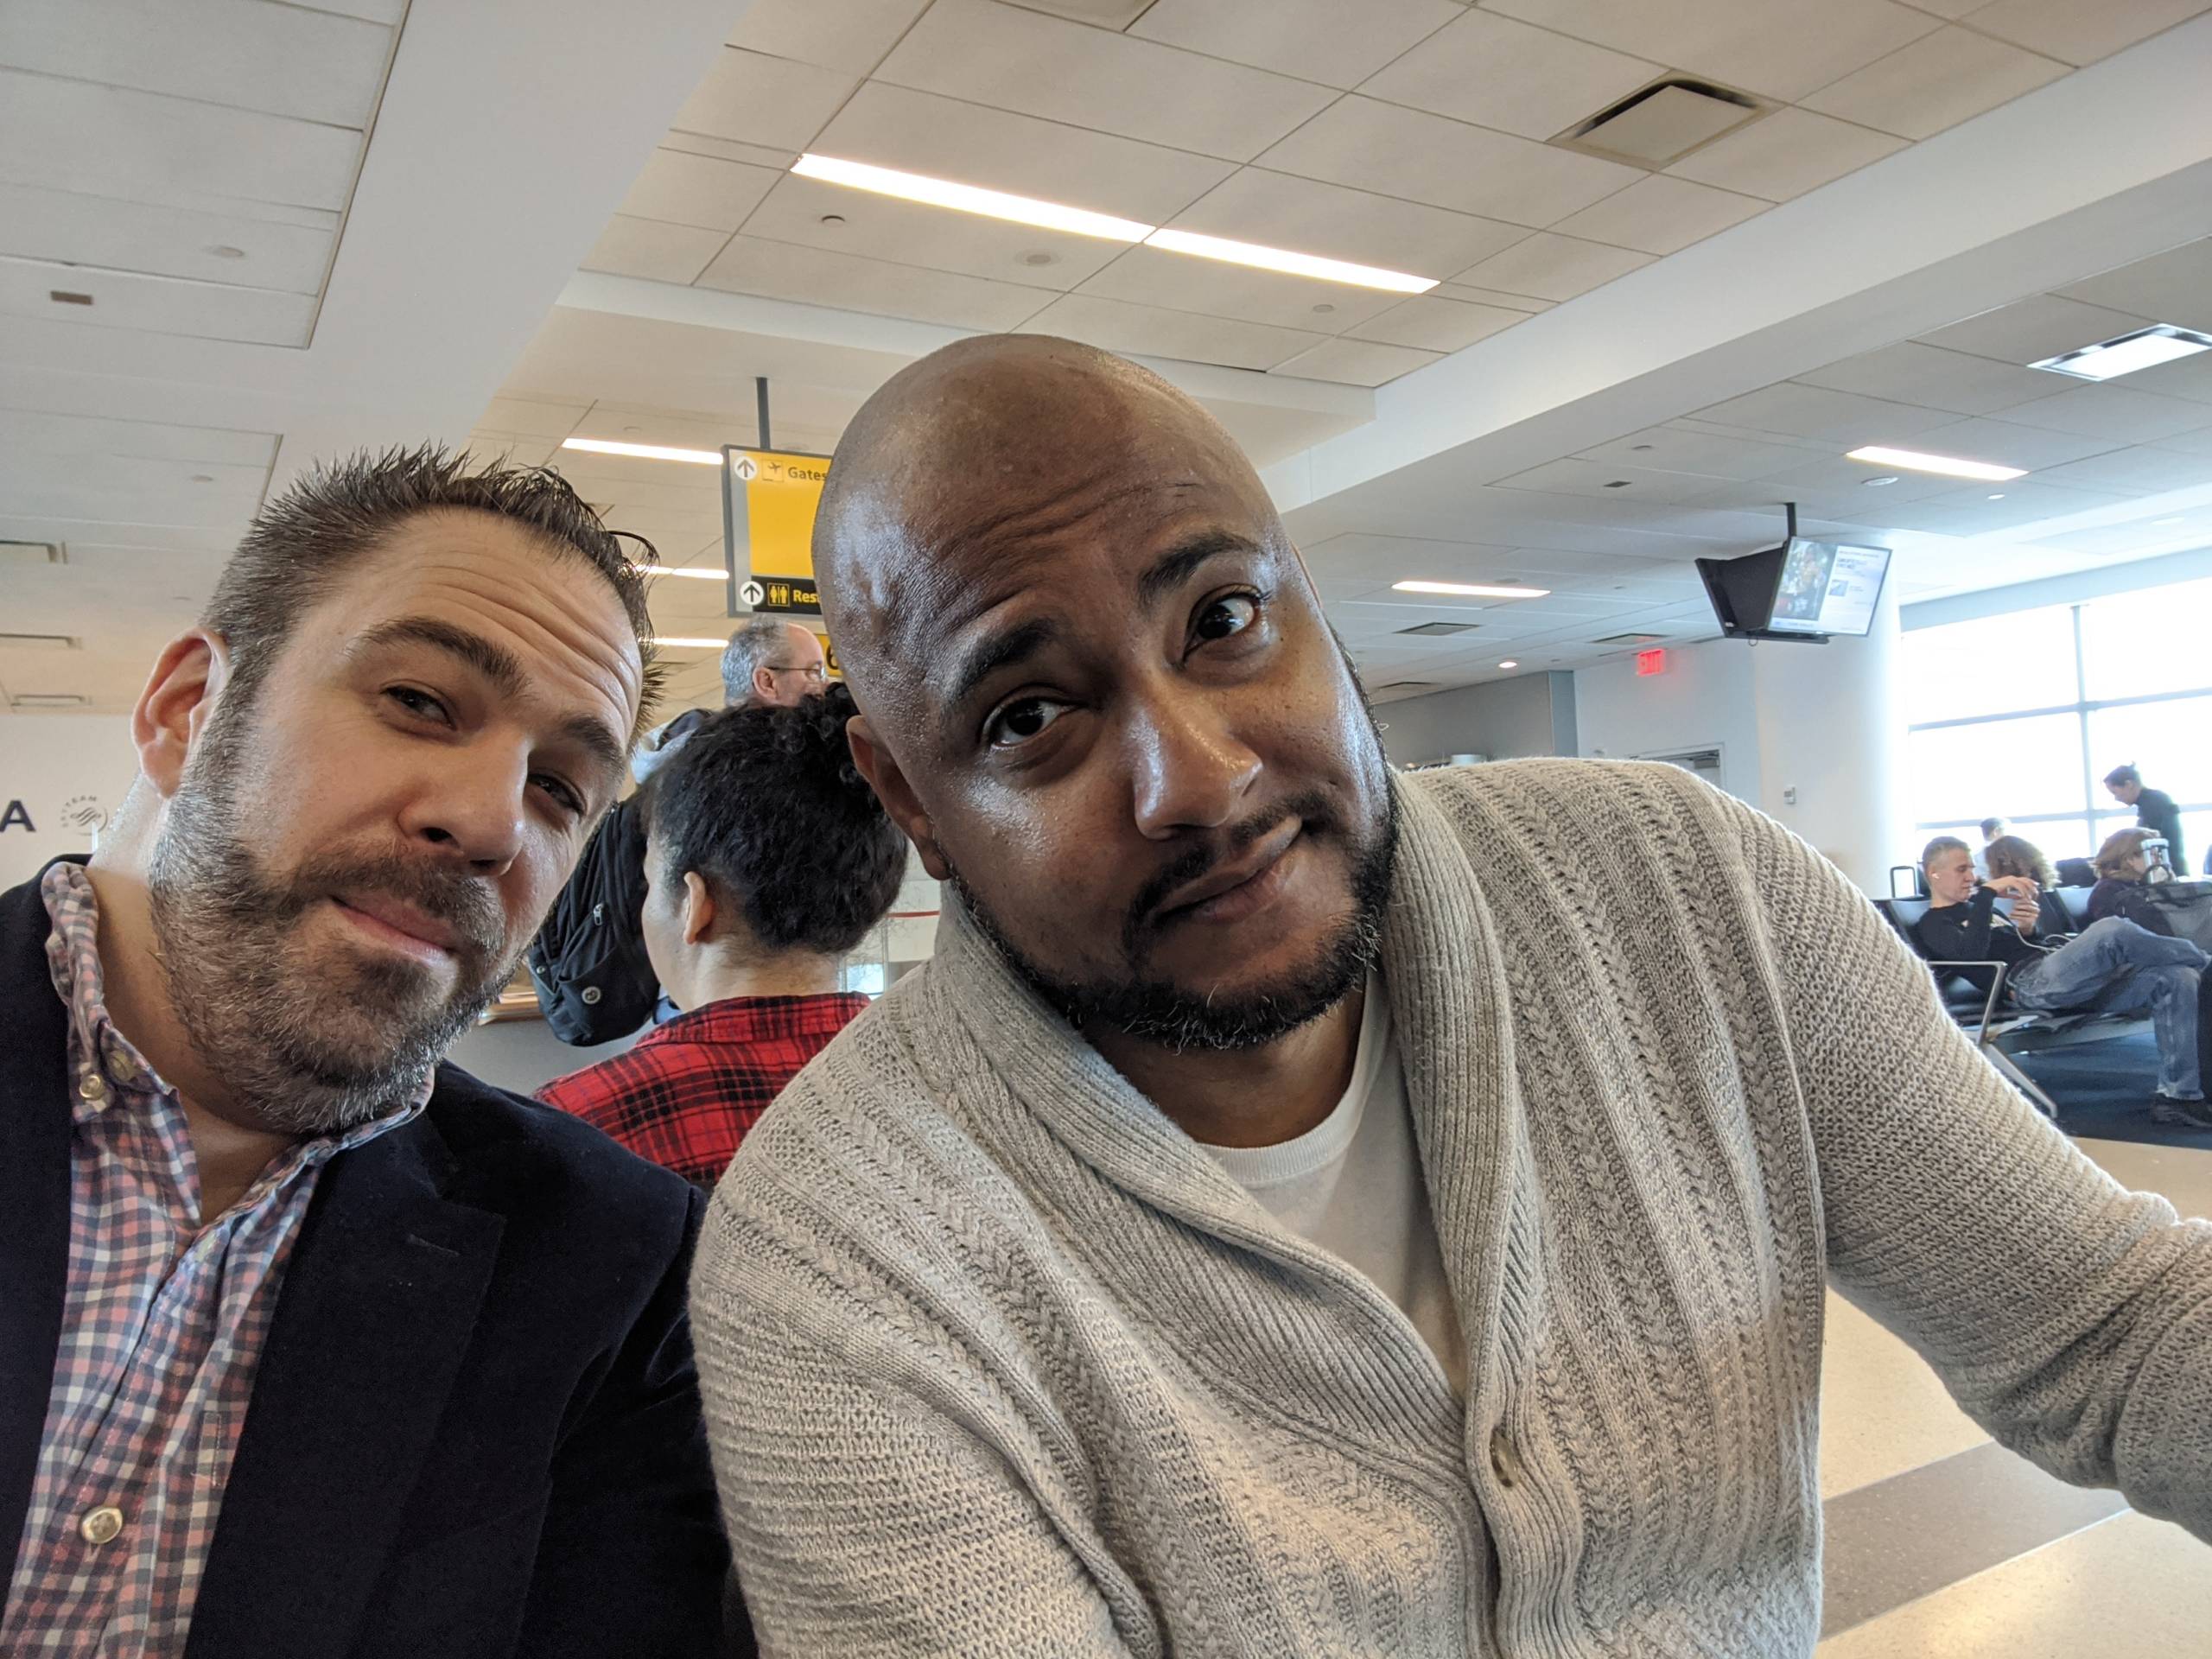 We’re off the PAX East 2020!